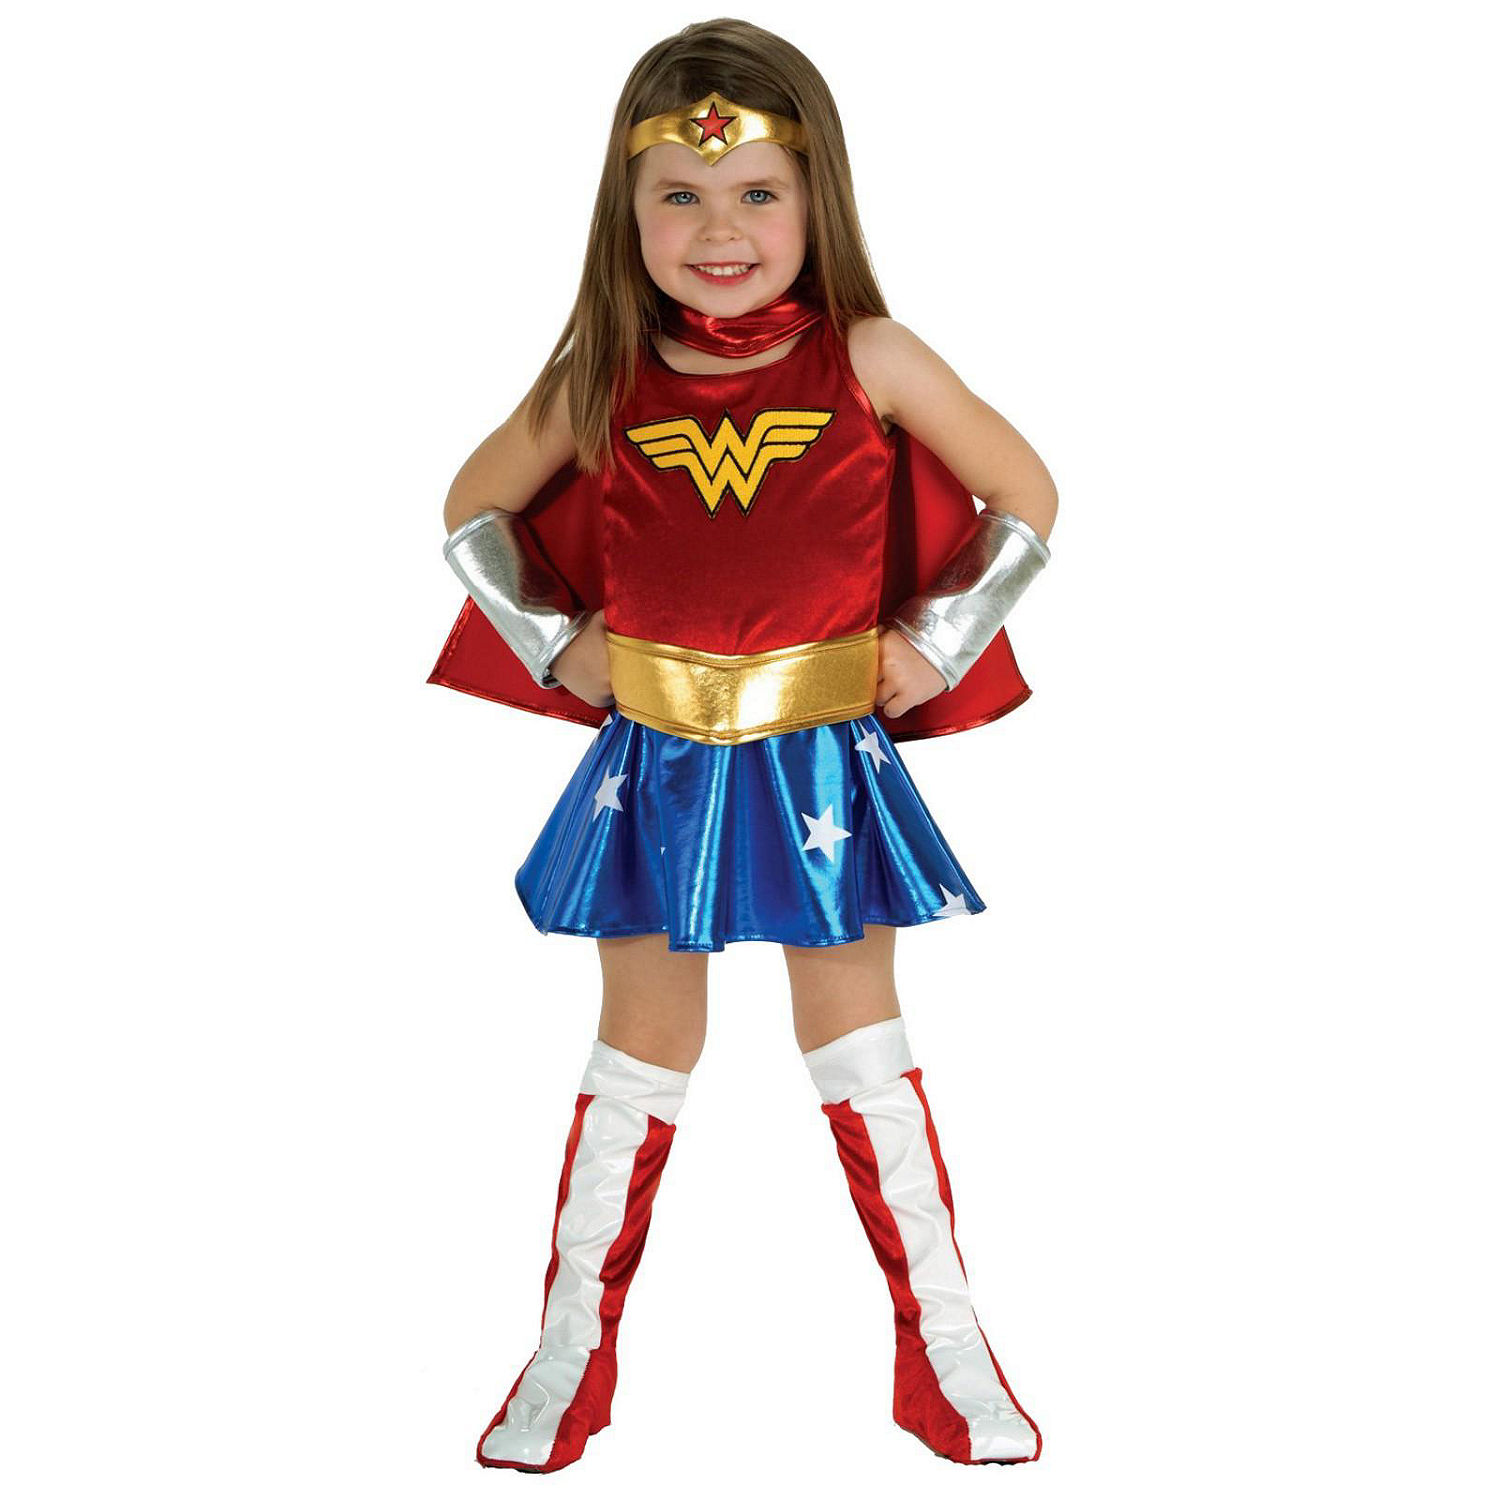 Toddler Girls Wonder Woman Costume - Dc Comics, Color: Red - JCPenney